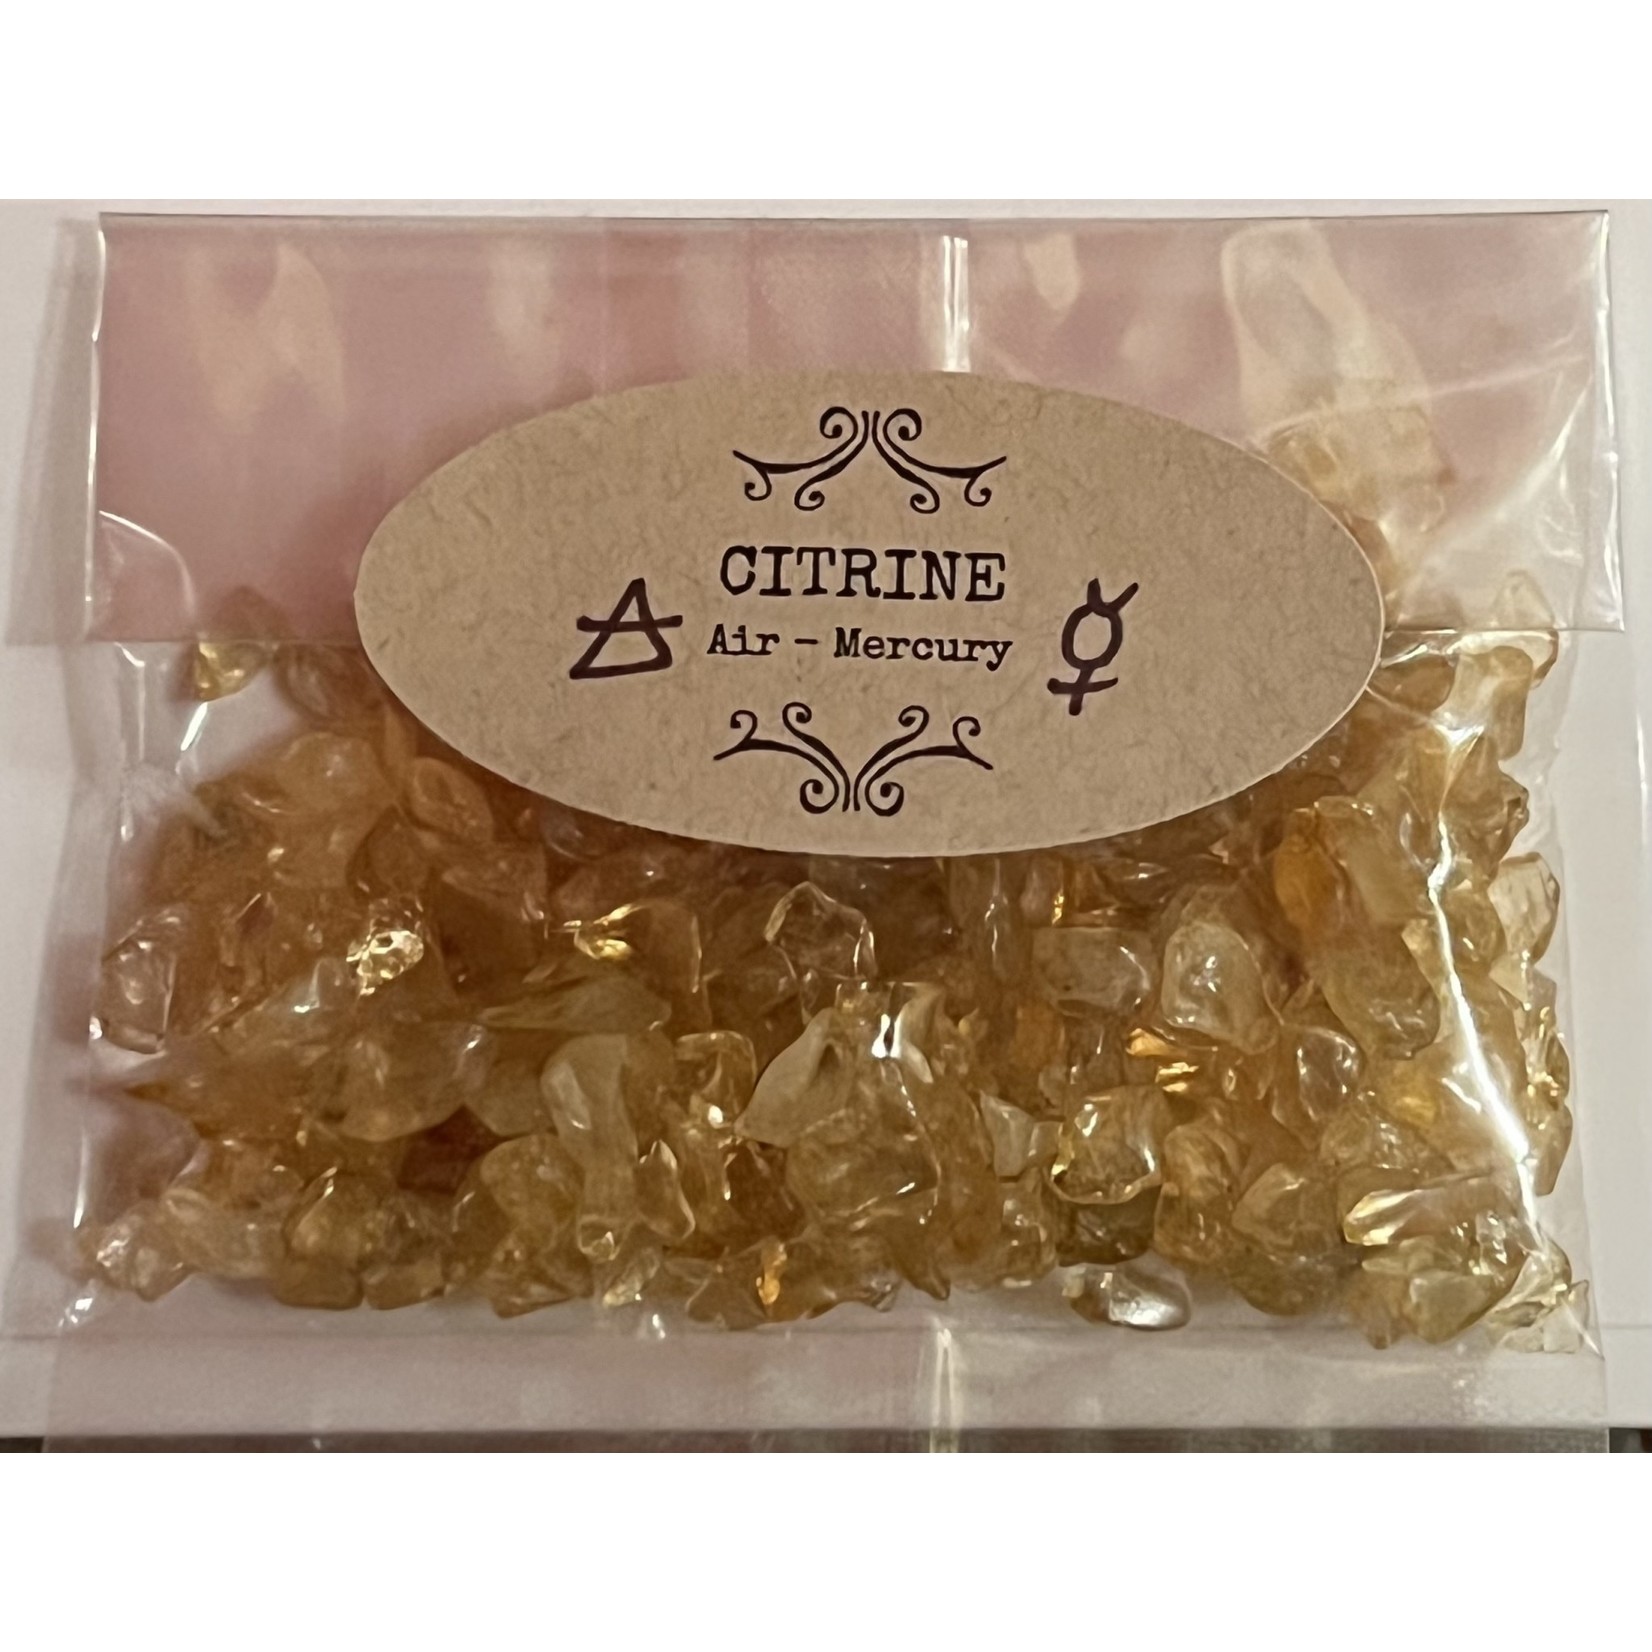 Witchcraft Provisions Stone Chips - Citrine